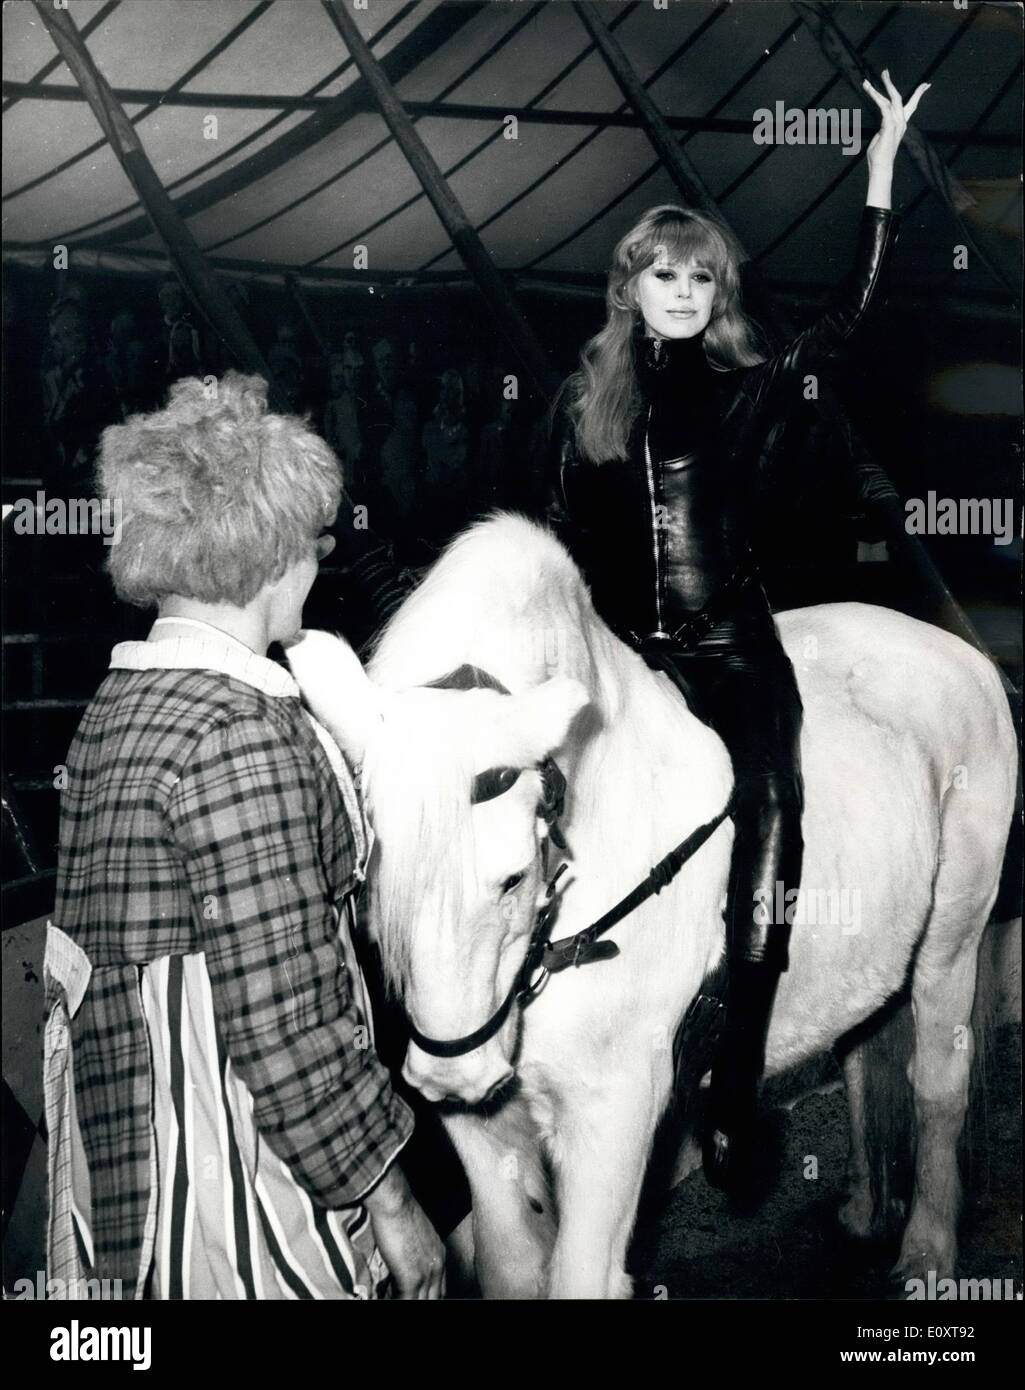 Nov. 11, 1967 - Marianne Faithfull and Alain Delon At The Circus - For New Film: Marianne Faithfull and Alain Delon, stars of the Anglo-French Production Girl On A Motorcycle, spend a day at the circus for dream scenes in this lyrical love drama, directed by Jack Cardiff, and co-produced by William Sesscon and Sacha Kamenka, for distribution by British Lion. Wearing her black leather motor cycling suit designed especially for her by Lanvin - Marianne circles round the sawdust ring on a circus horse while Alain - who plays her lover Daniel in the film - cracks a commanding whip as Ringmaster Stock Photo